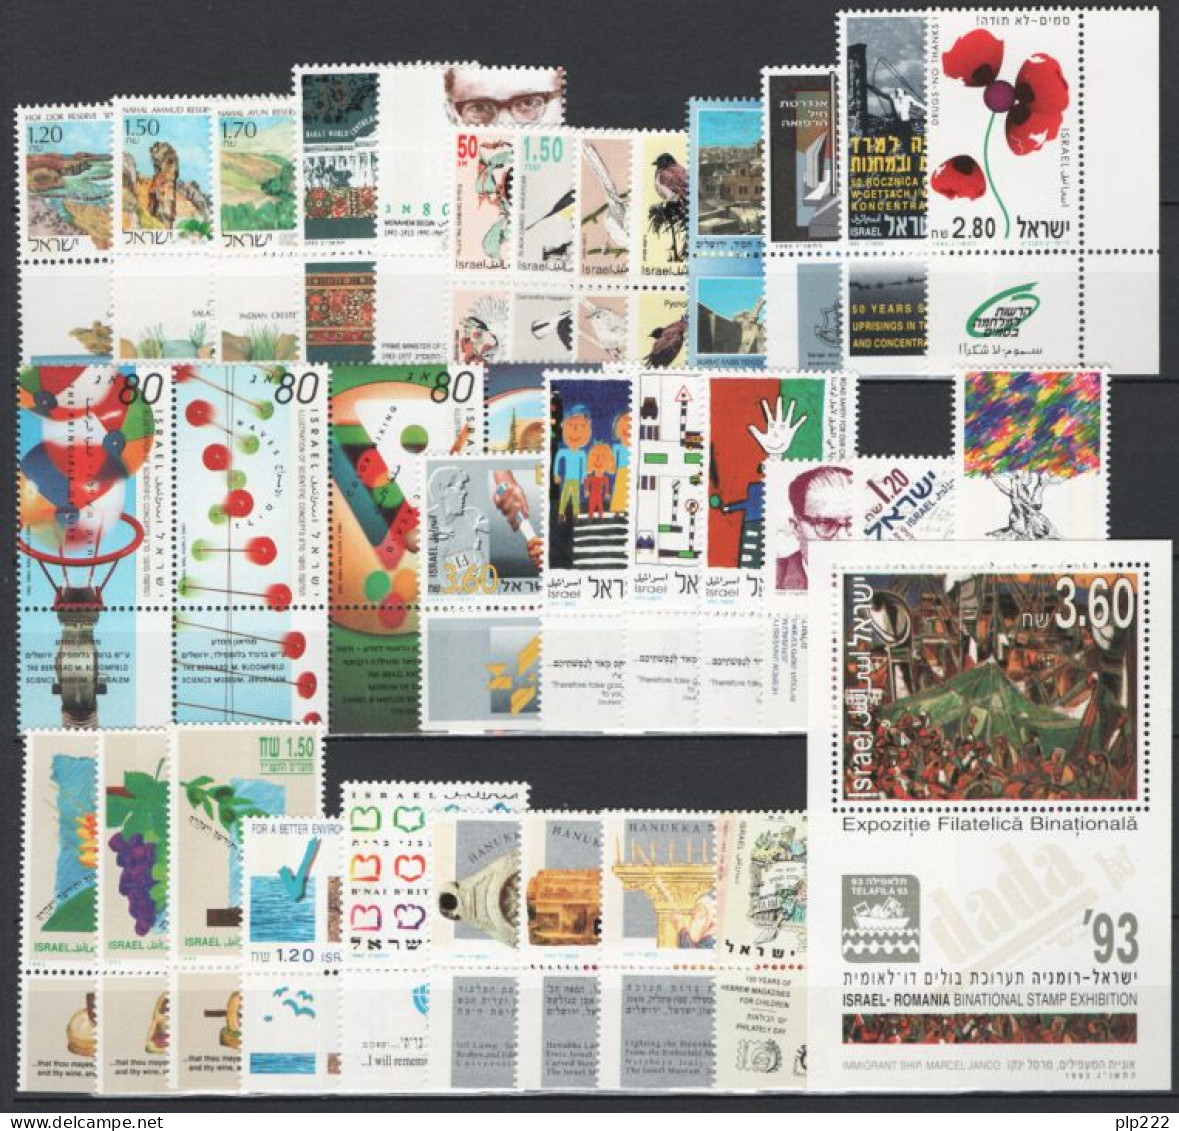 Israele 1993 Annata Completa Con Appendice / Complete Year Set With Tab **/MNH VF - Années Complètes